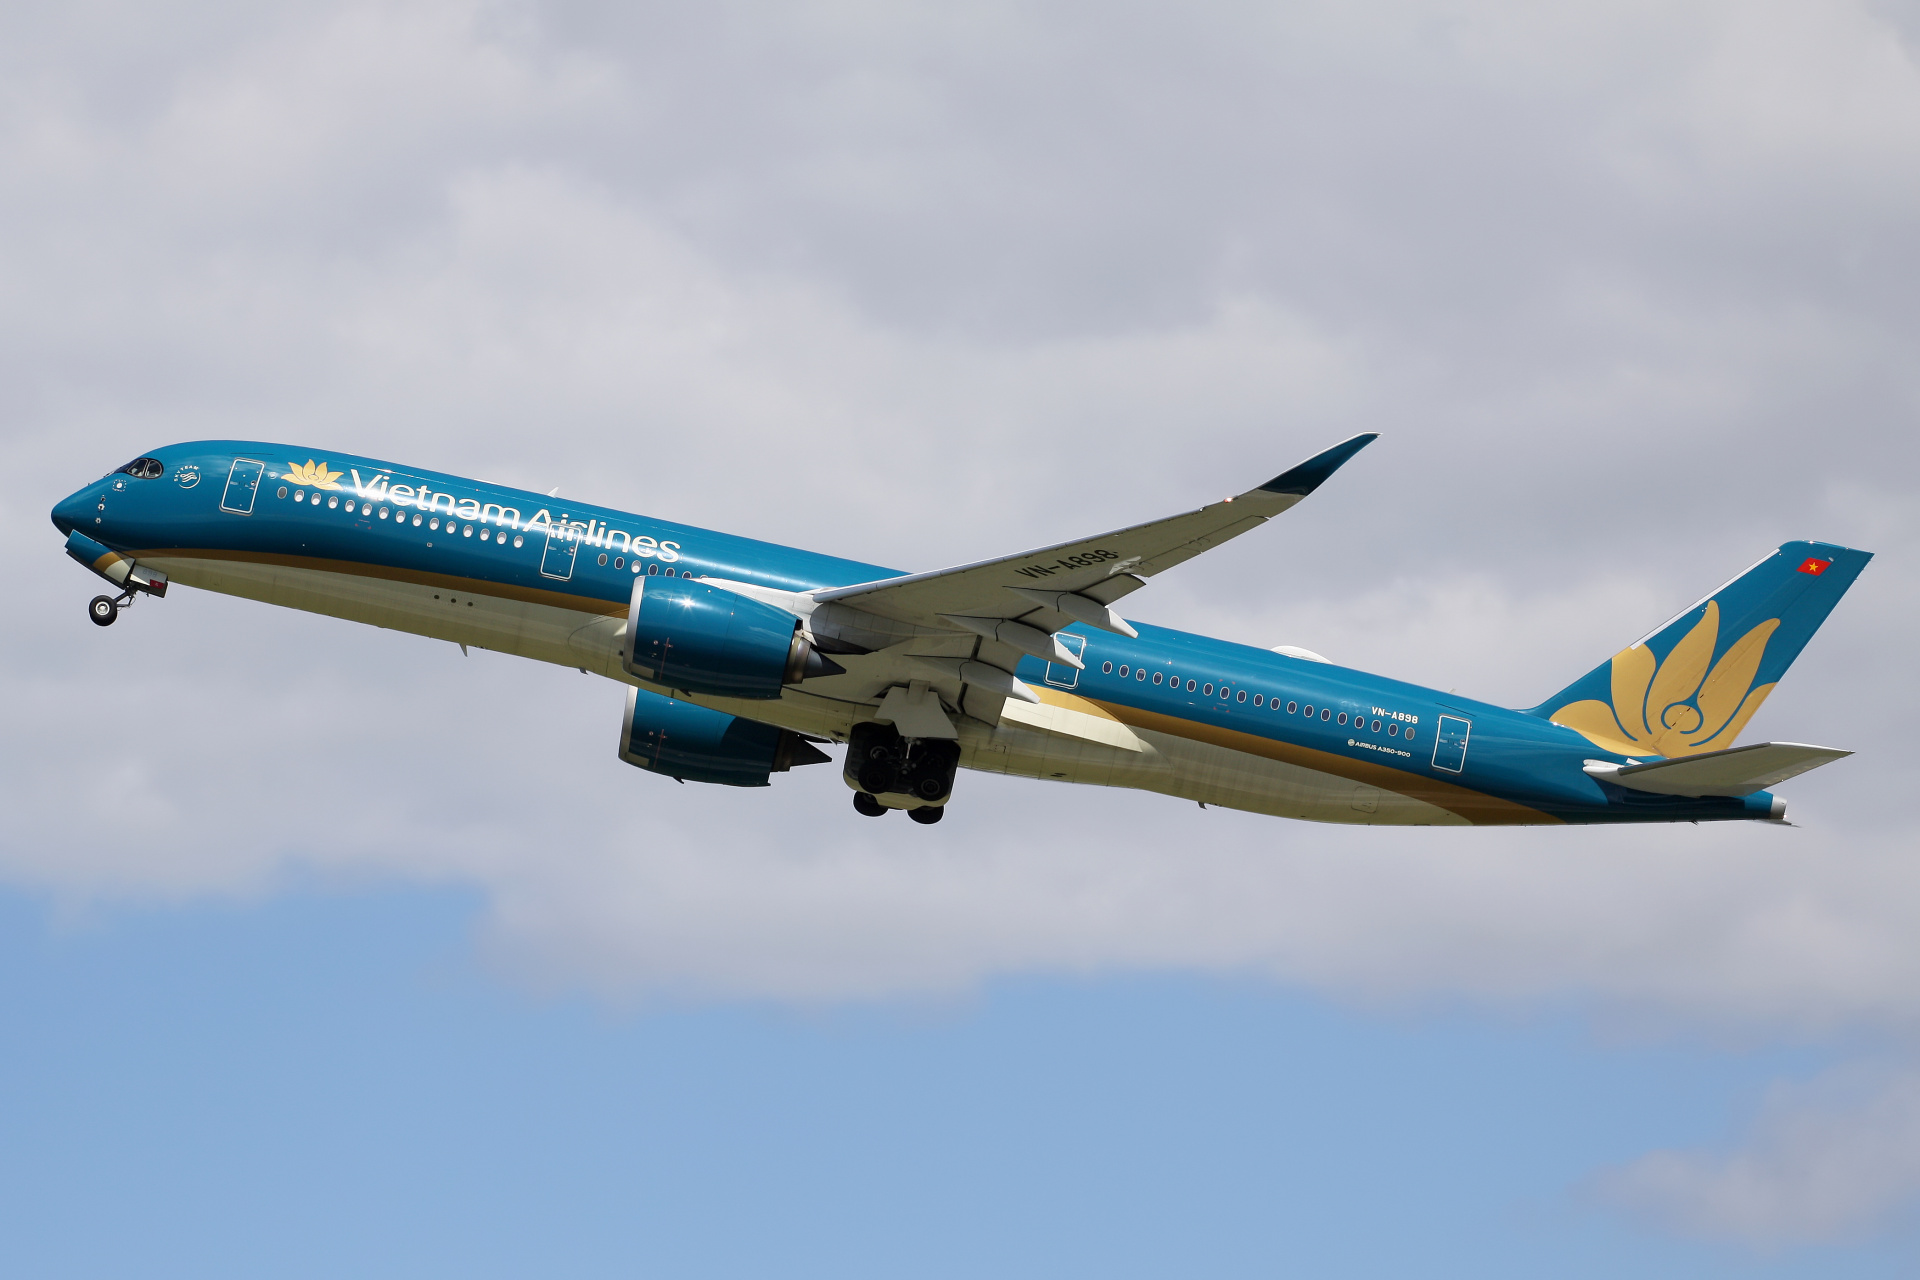 VN-A898, Vietnam Airlines (Samoloty » Spotting na EPWA » Airbus A350-900)